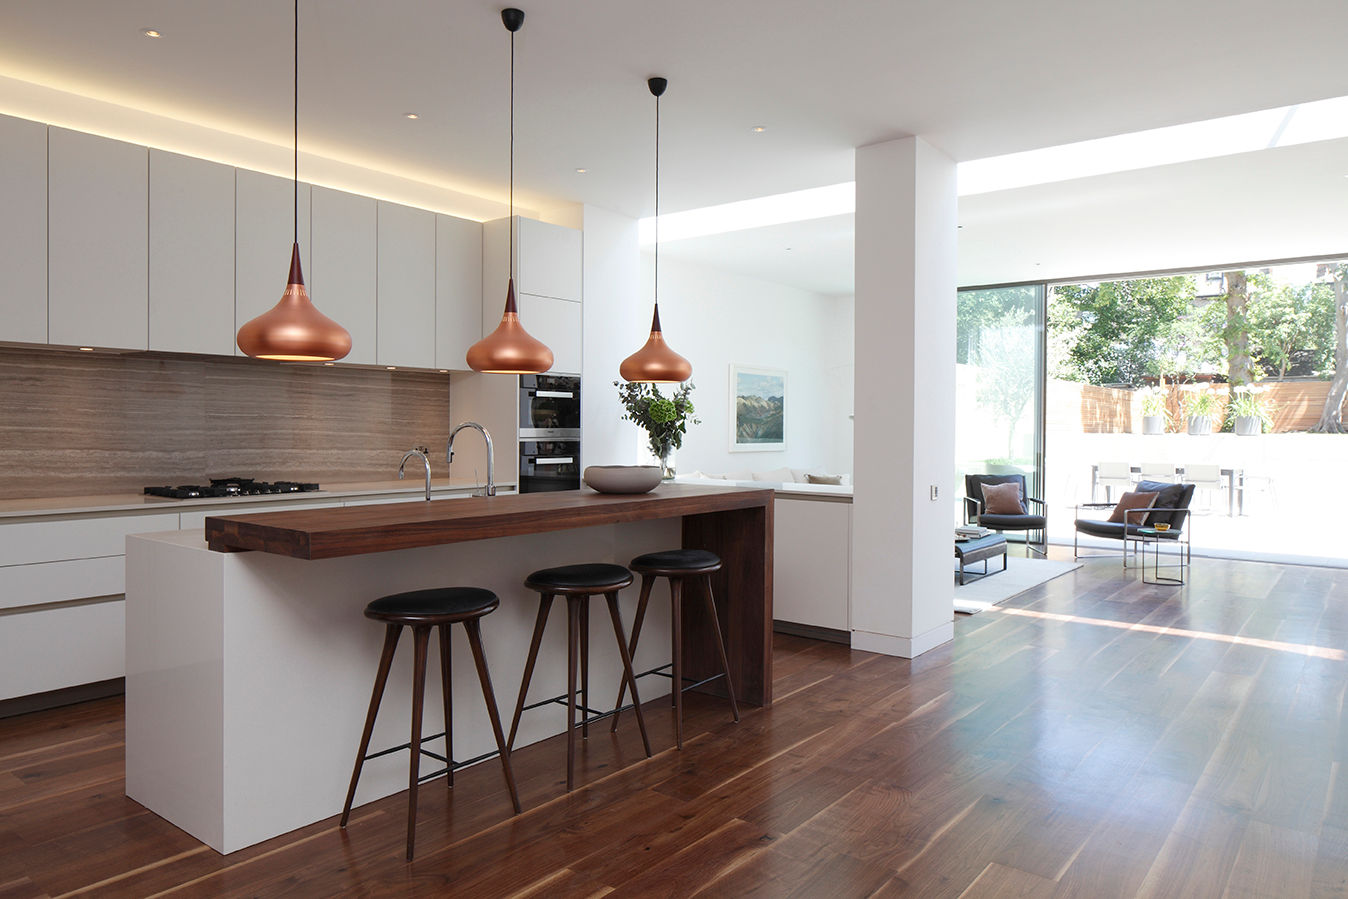 Macauley Road Townhouses, Clapham, Squire and Partners Squire and Partners ห้องครัว